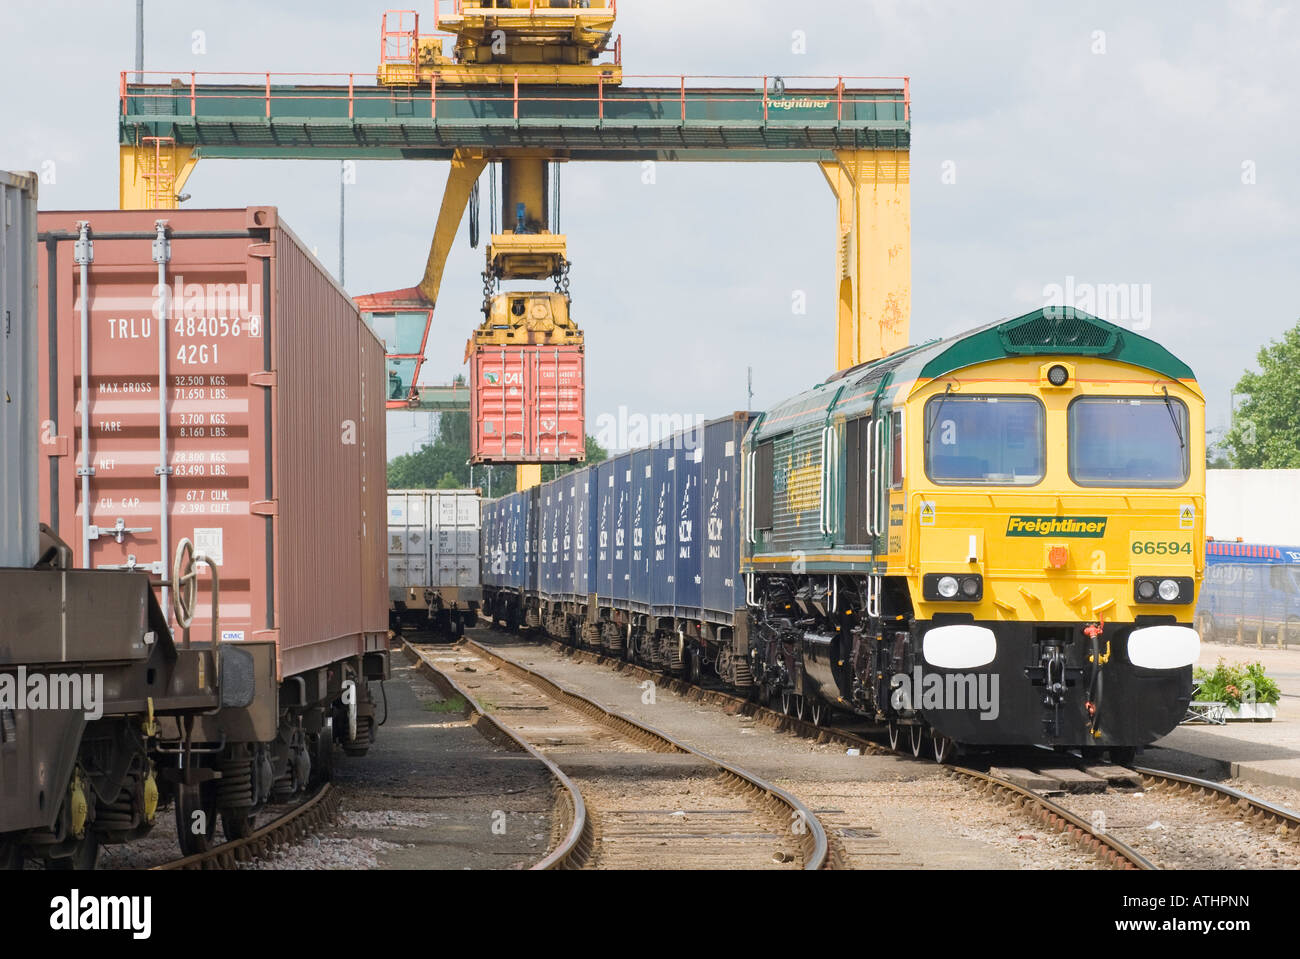 Freightliner class 66 locomotive with containers at the Southampton rail freight terminal, England. Stock Photo